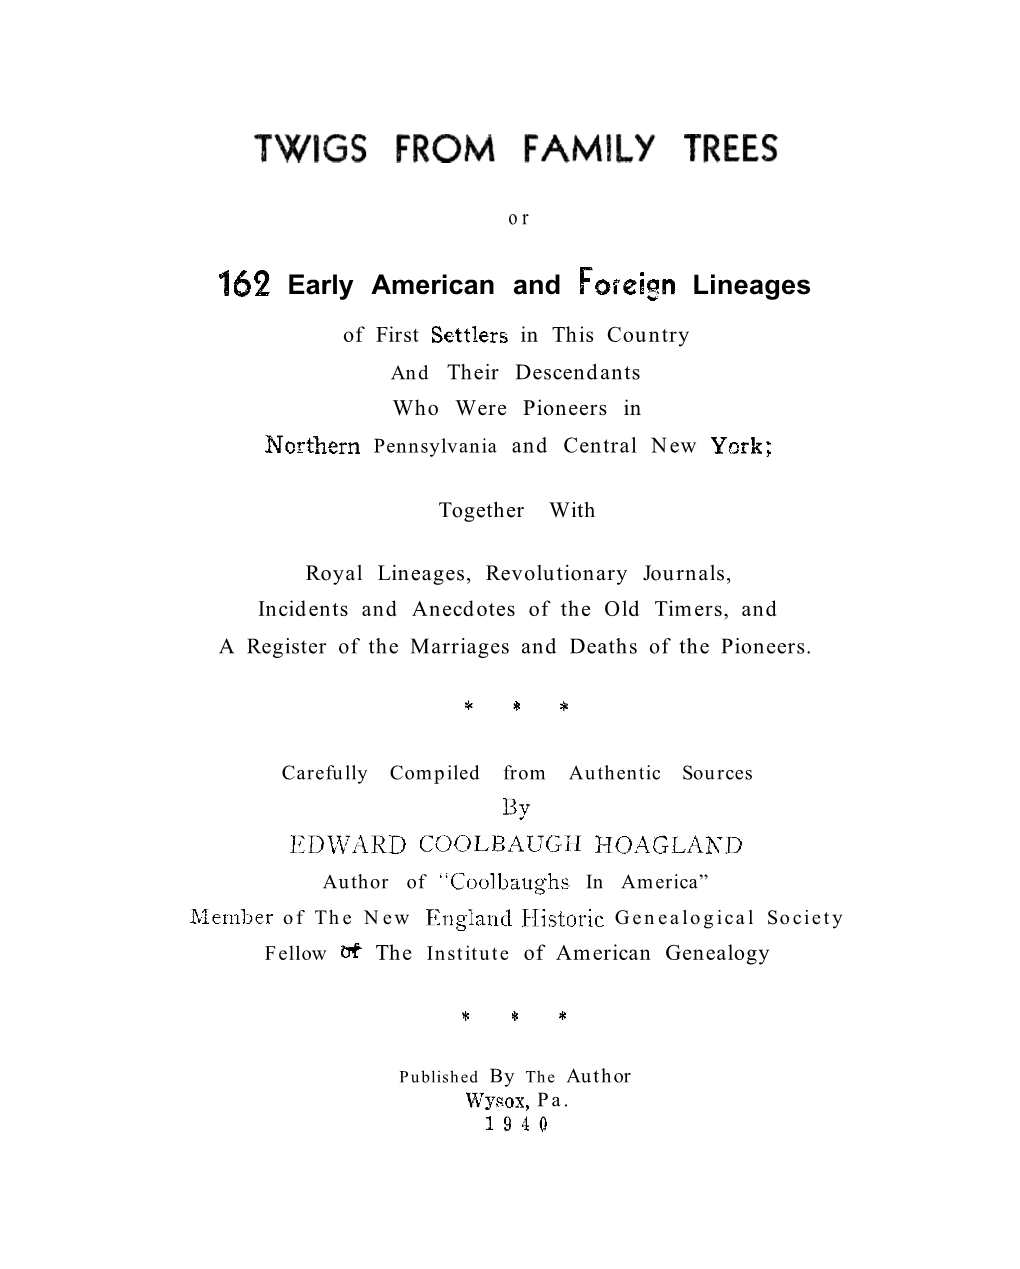 Twigs from Family Trees